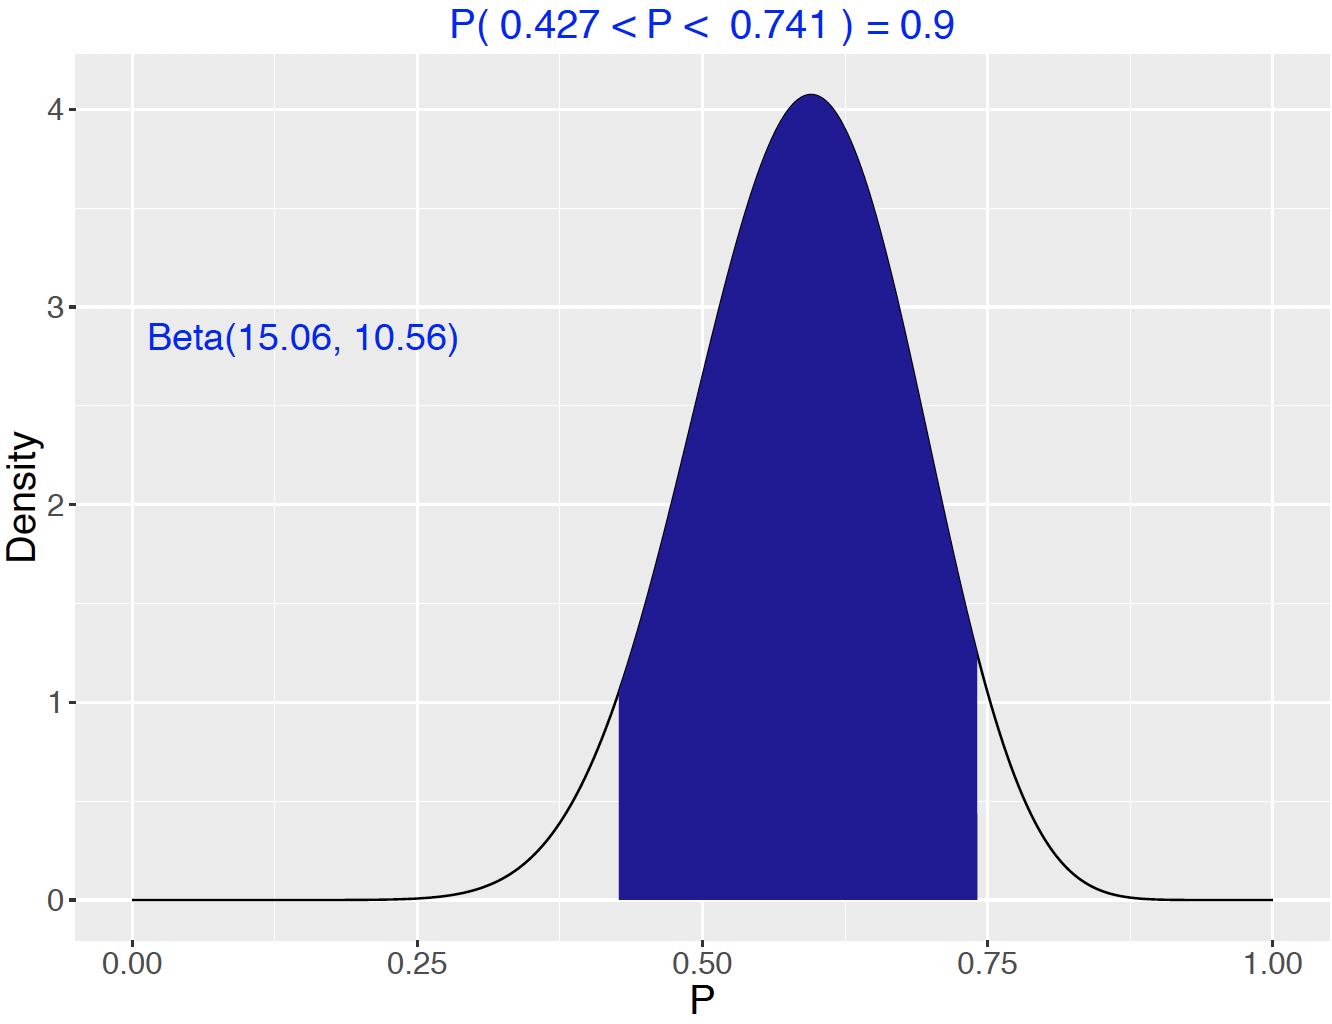 Display of 90% probability interval for the proportion $p$.